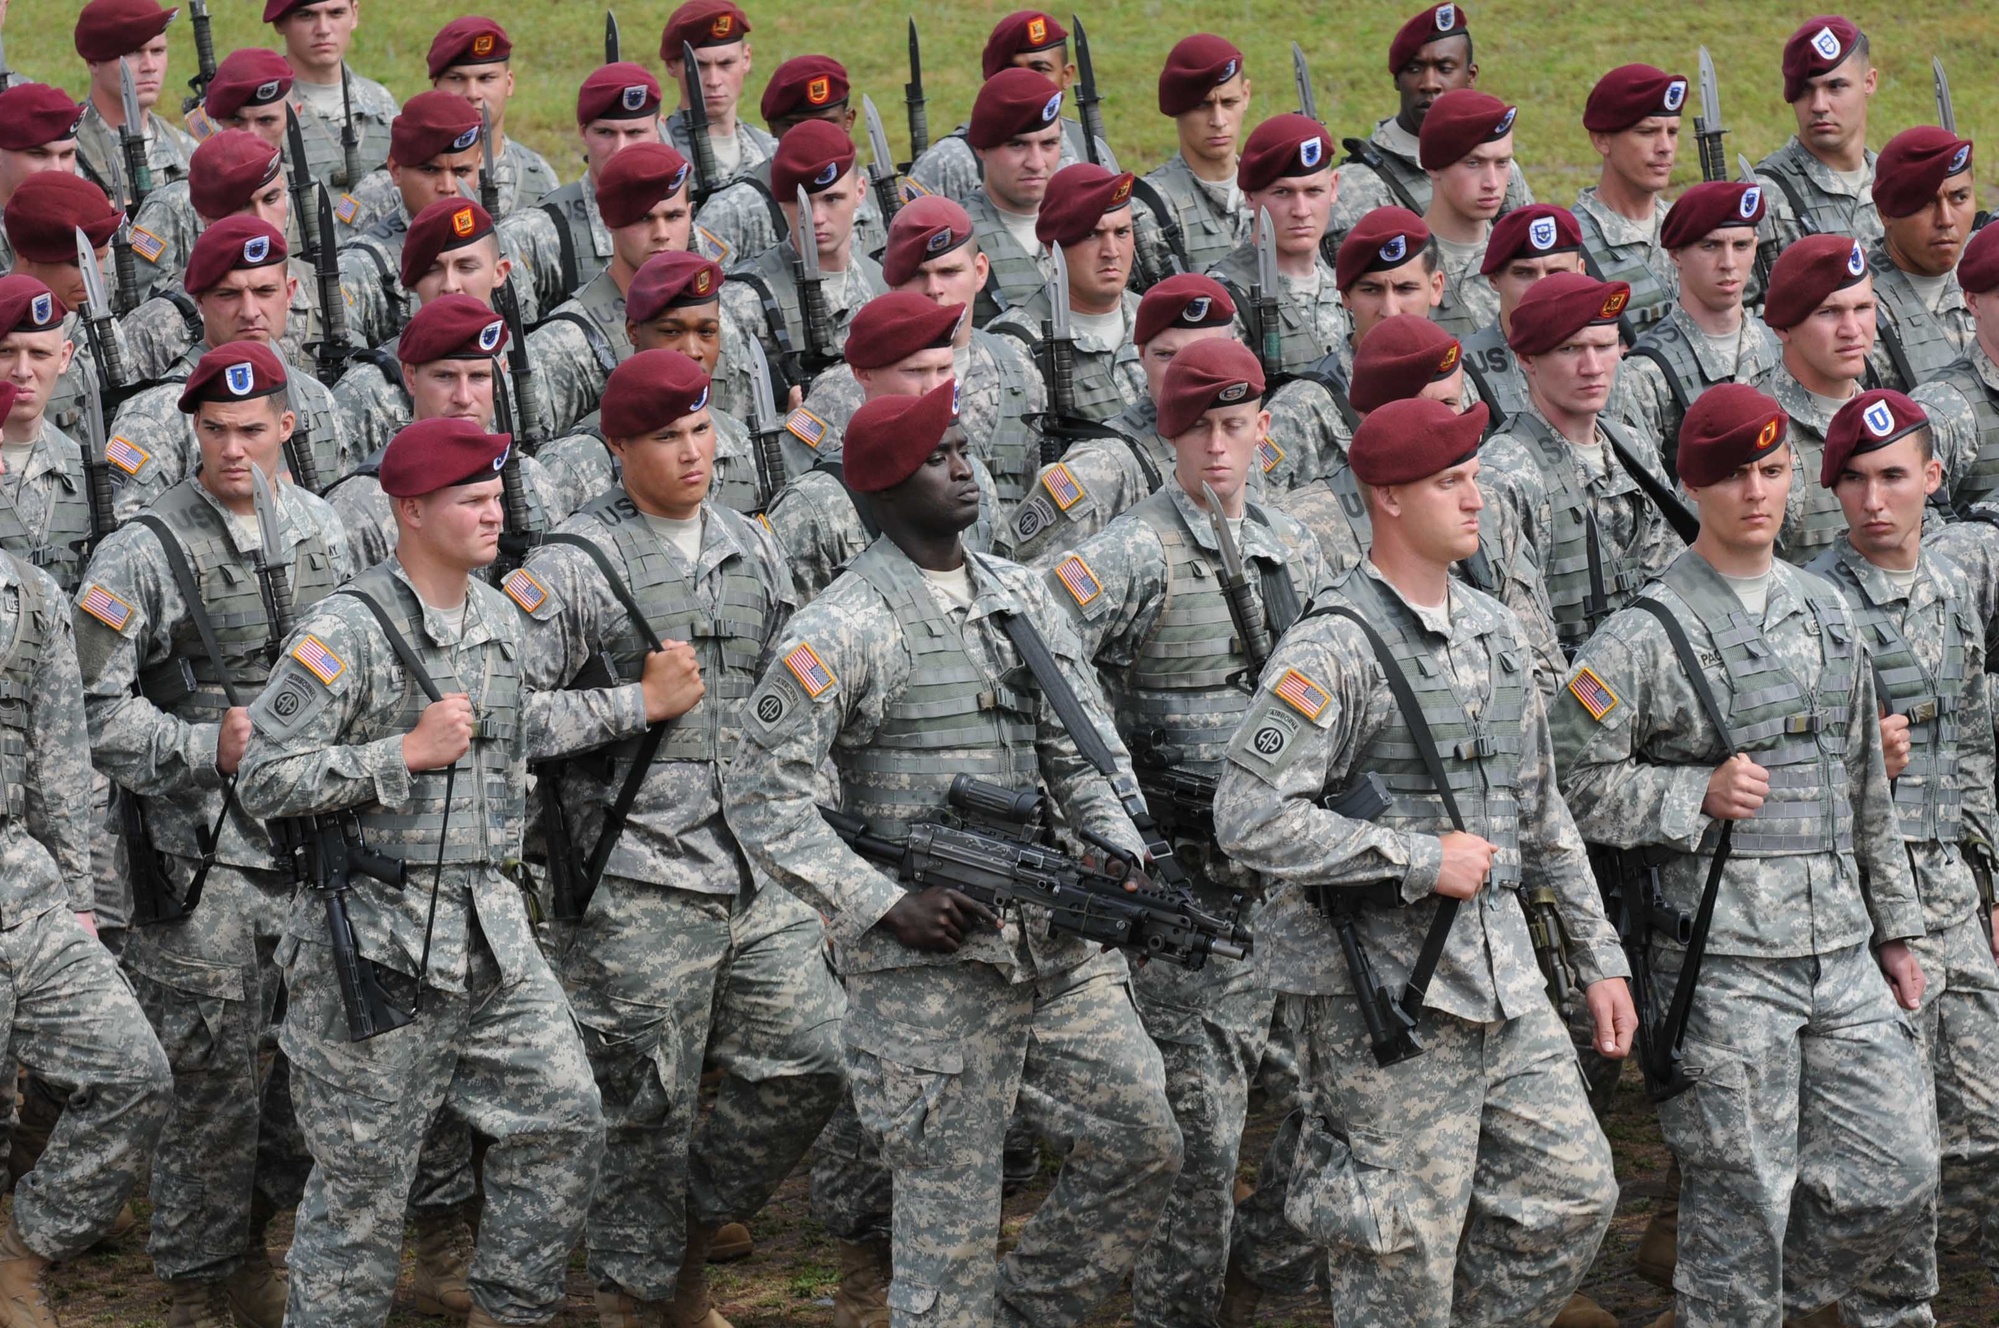 DVIDS - Images - 82nd Airborne Division Holds All American Week